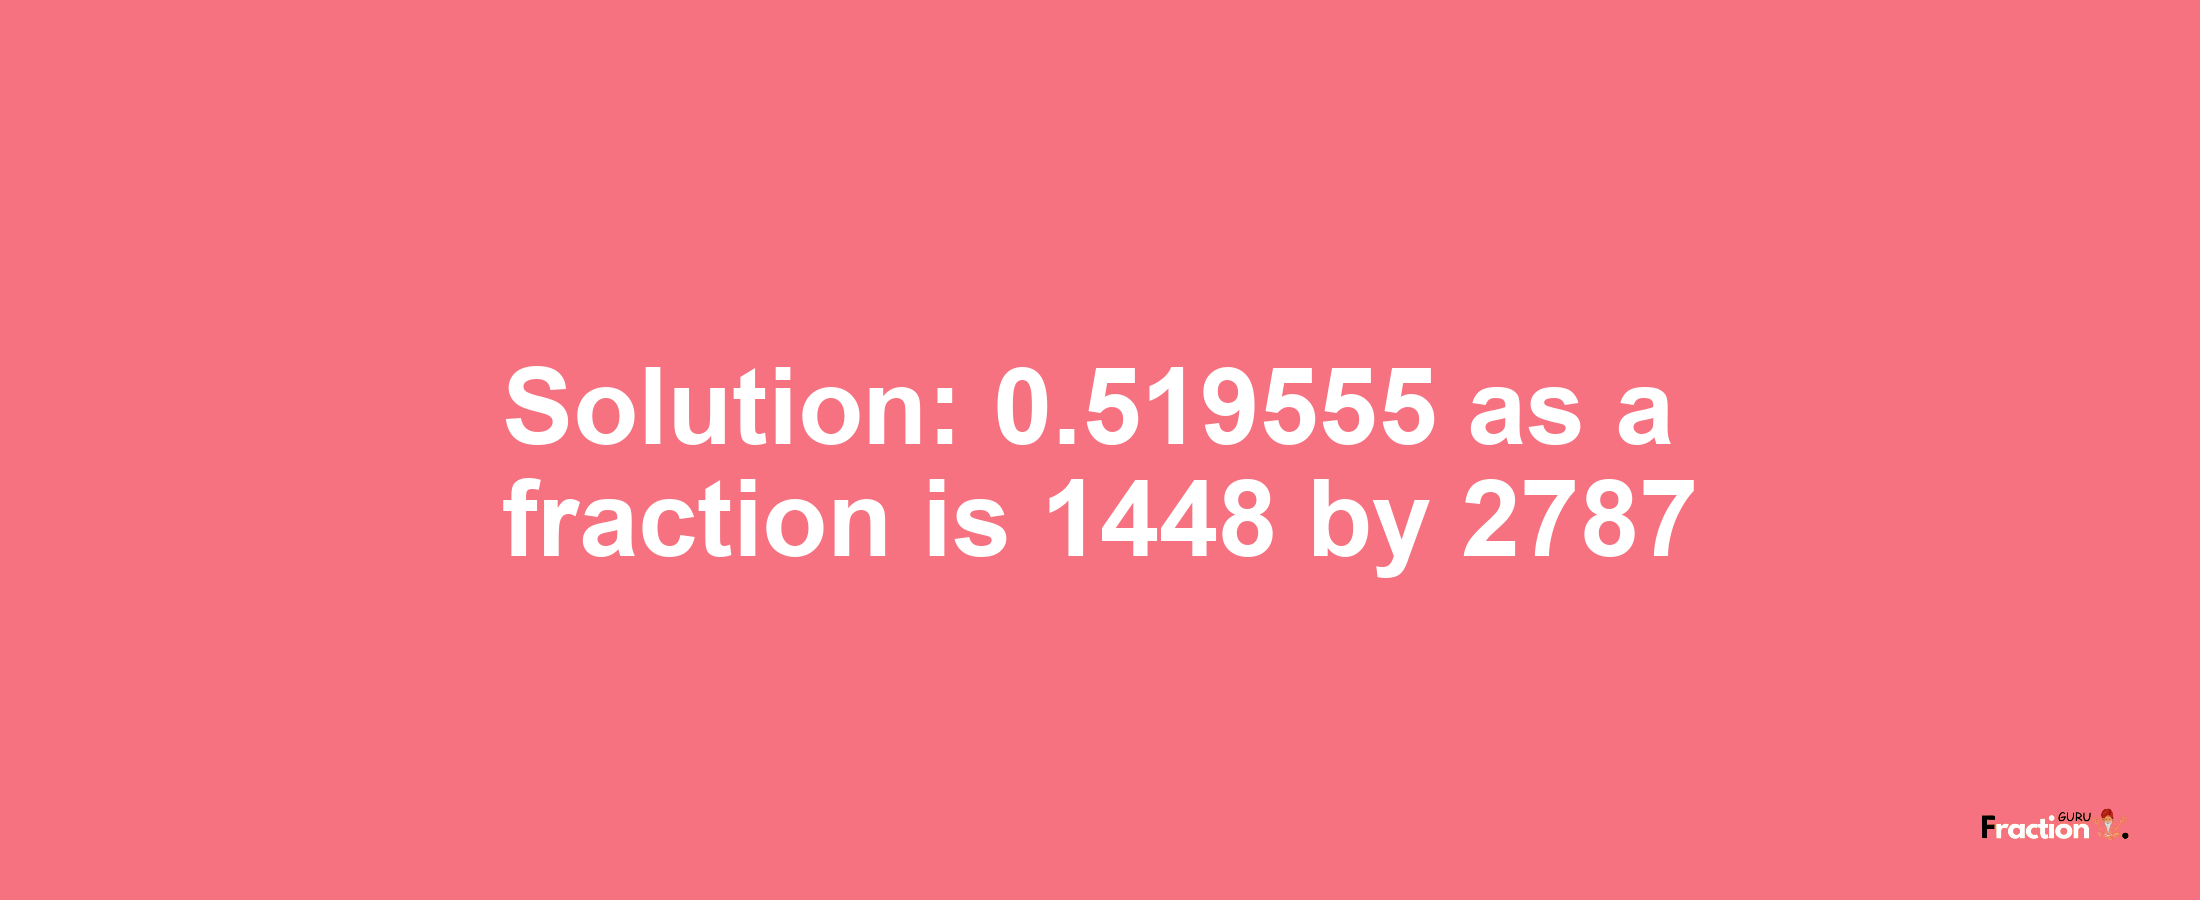 Solution:0.519555 as a fraction is 1448/2787